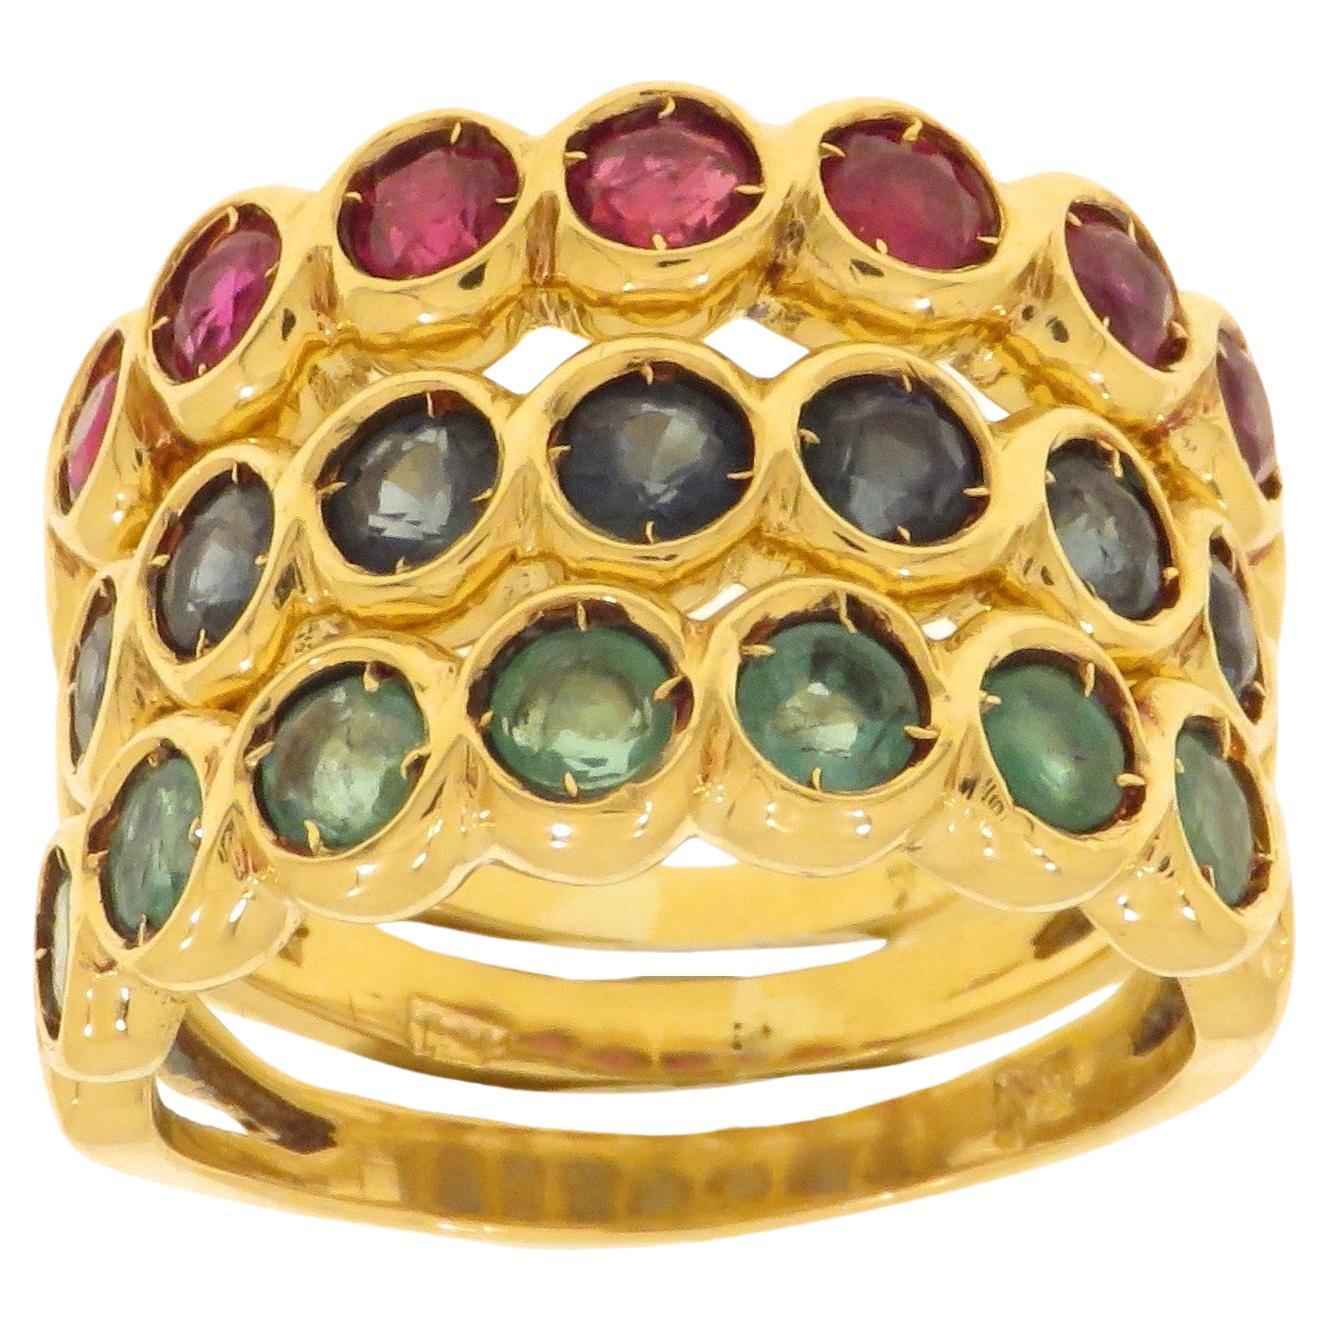 Three 18k Yellow Gold Eternity Wedding Rings With Rubies Sapphires Emeralds